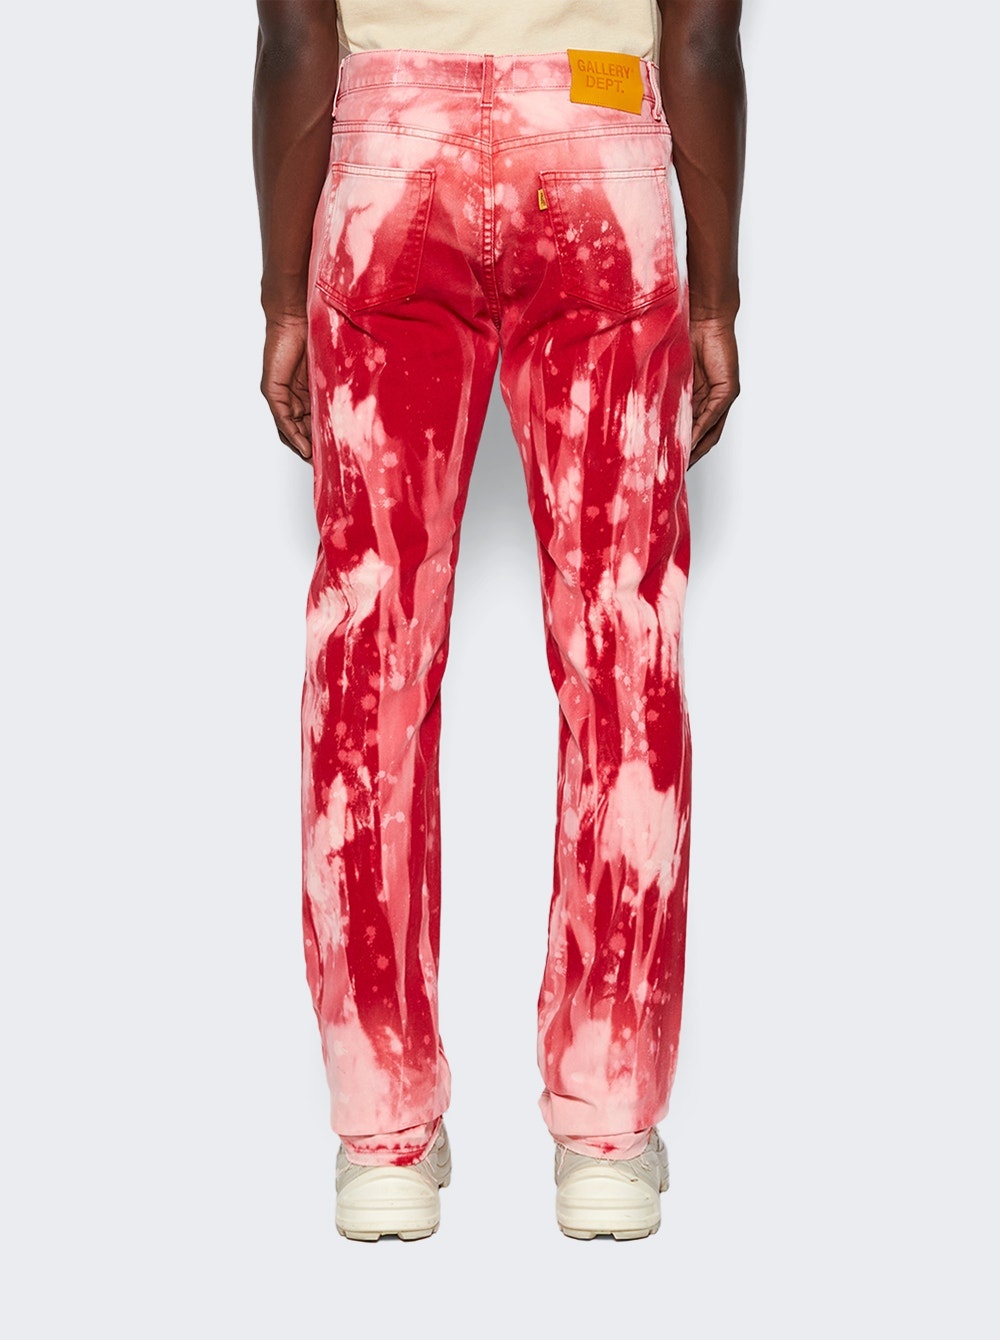 Biscayne Jeans Red Tie Dye - 5